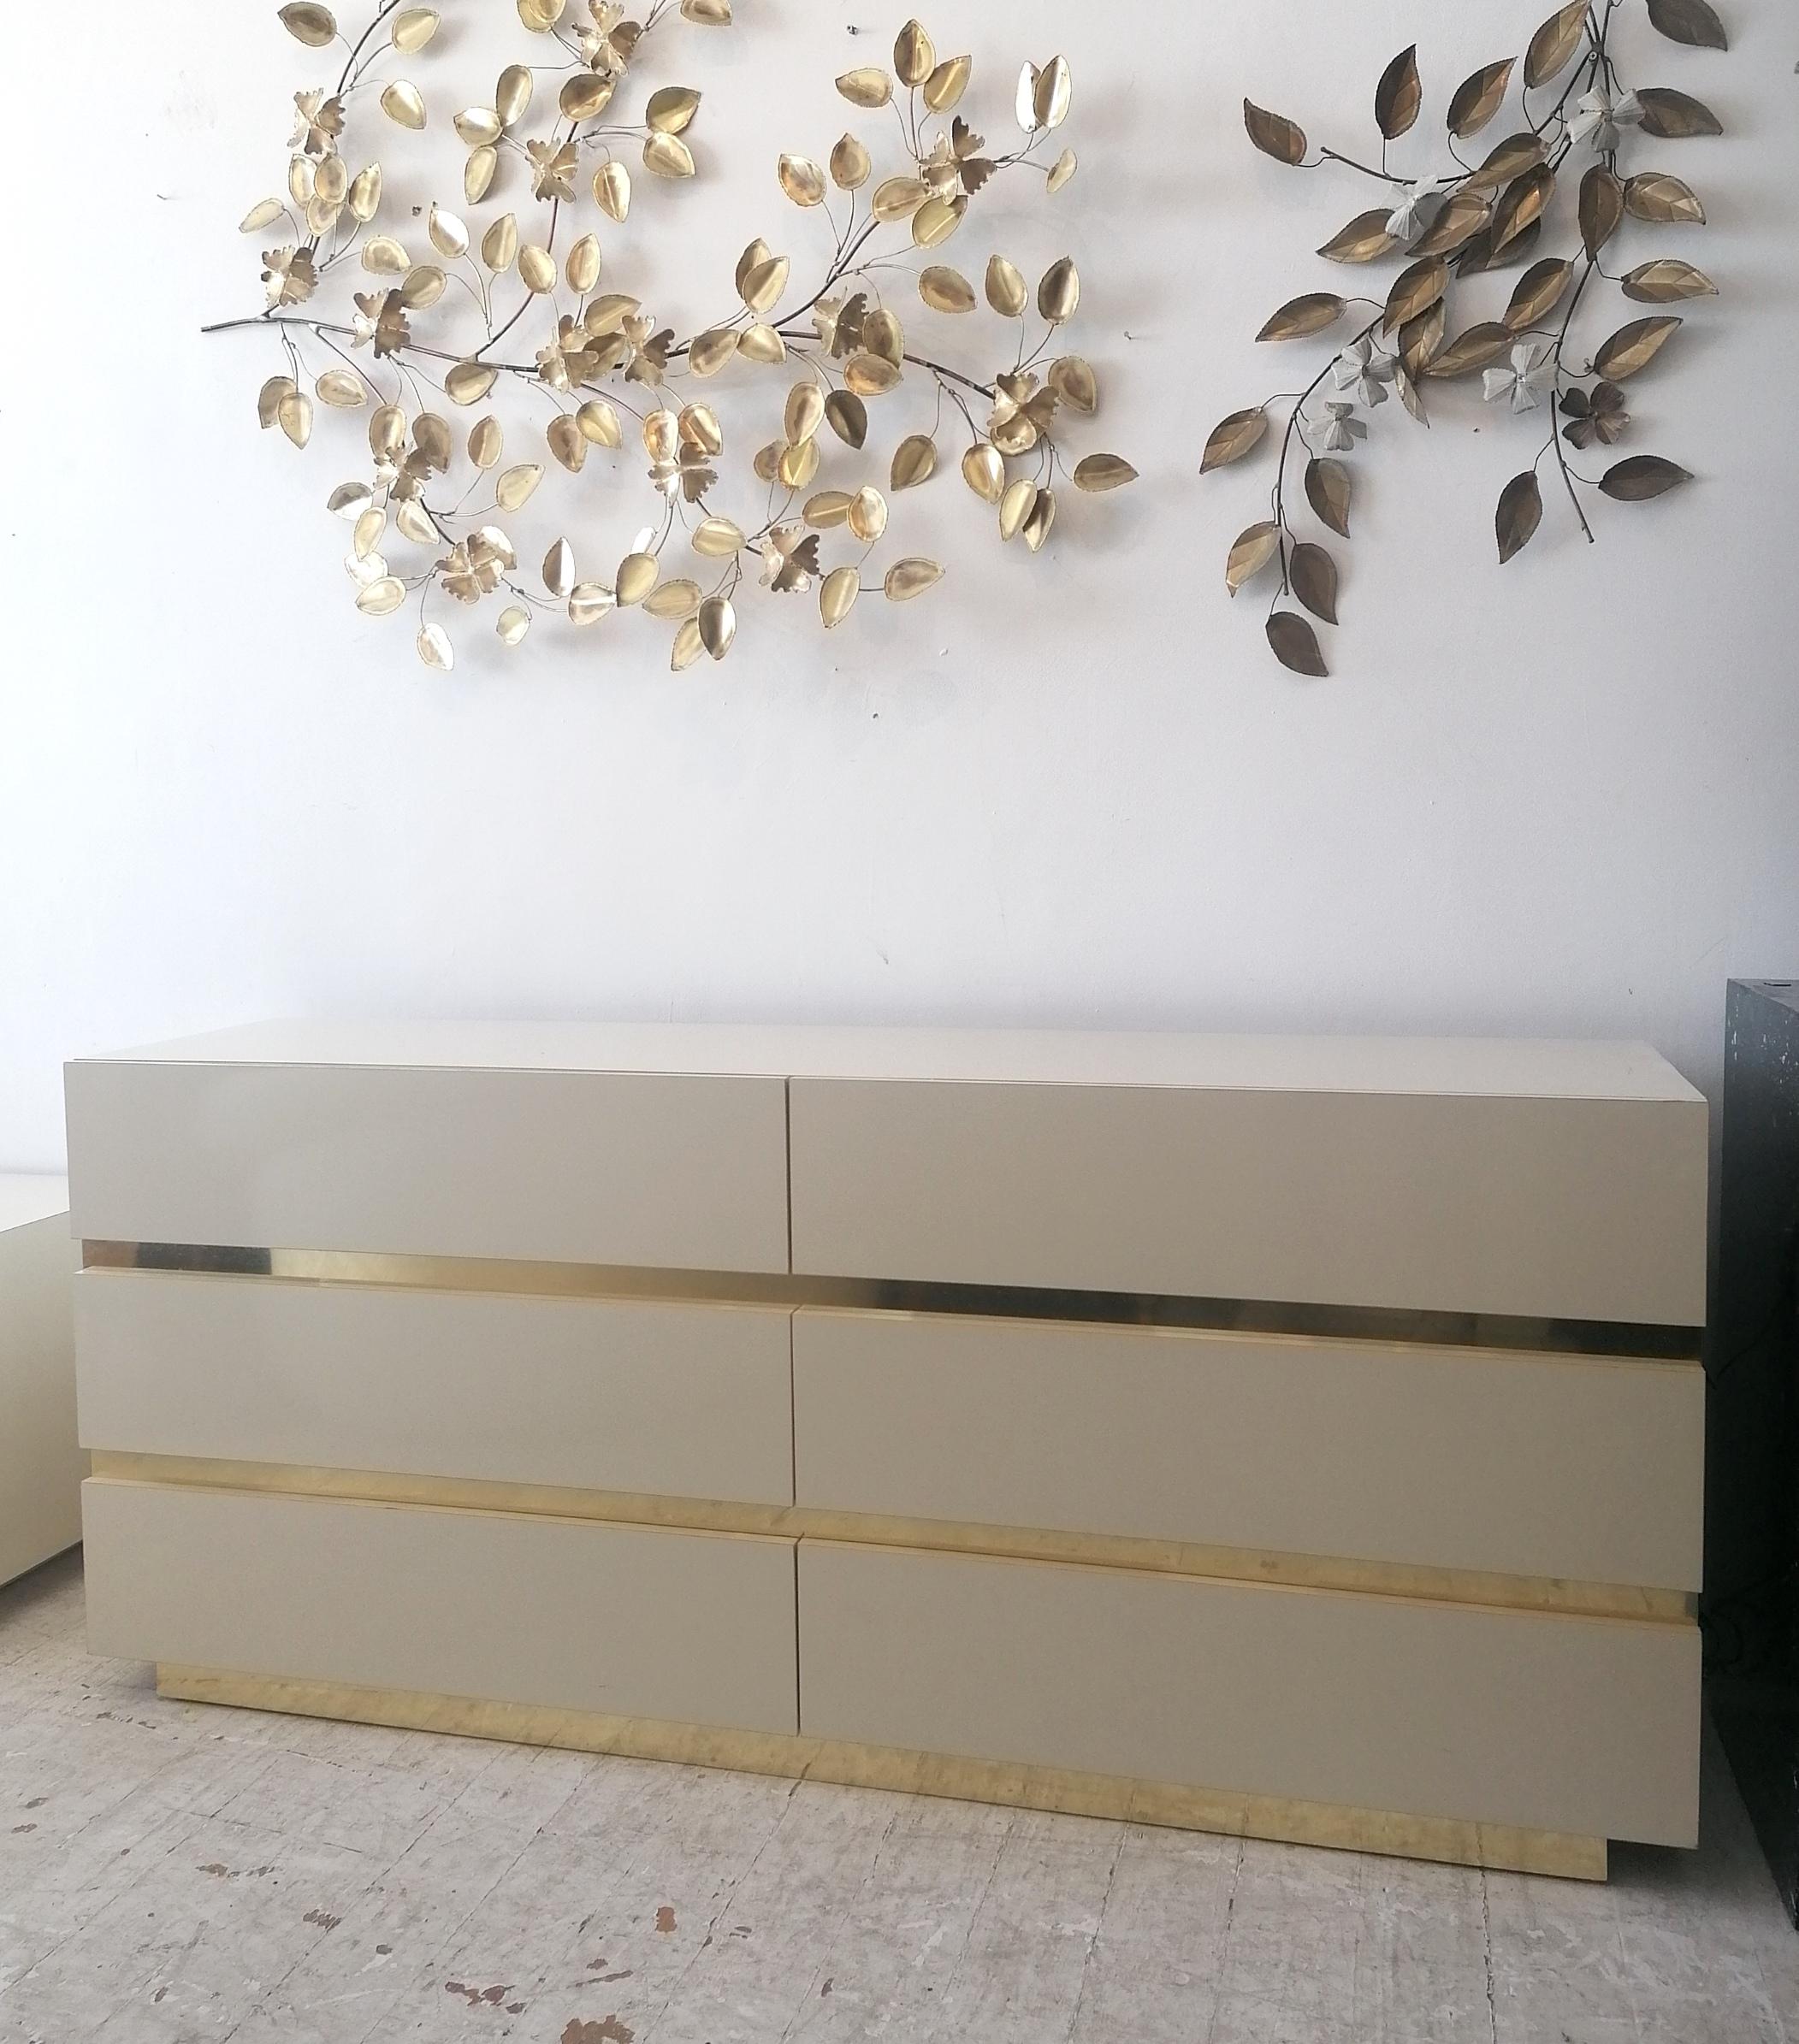 1980s American cream laminate and gold metal sideboard / dresser with drawers, in great condition. 

Dimensions: width 172.5cm, depth 44. 5cm, height 75cm
